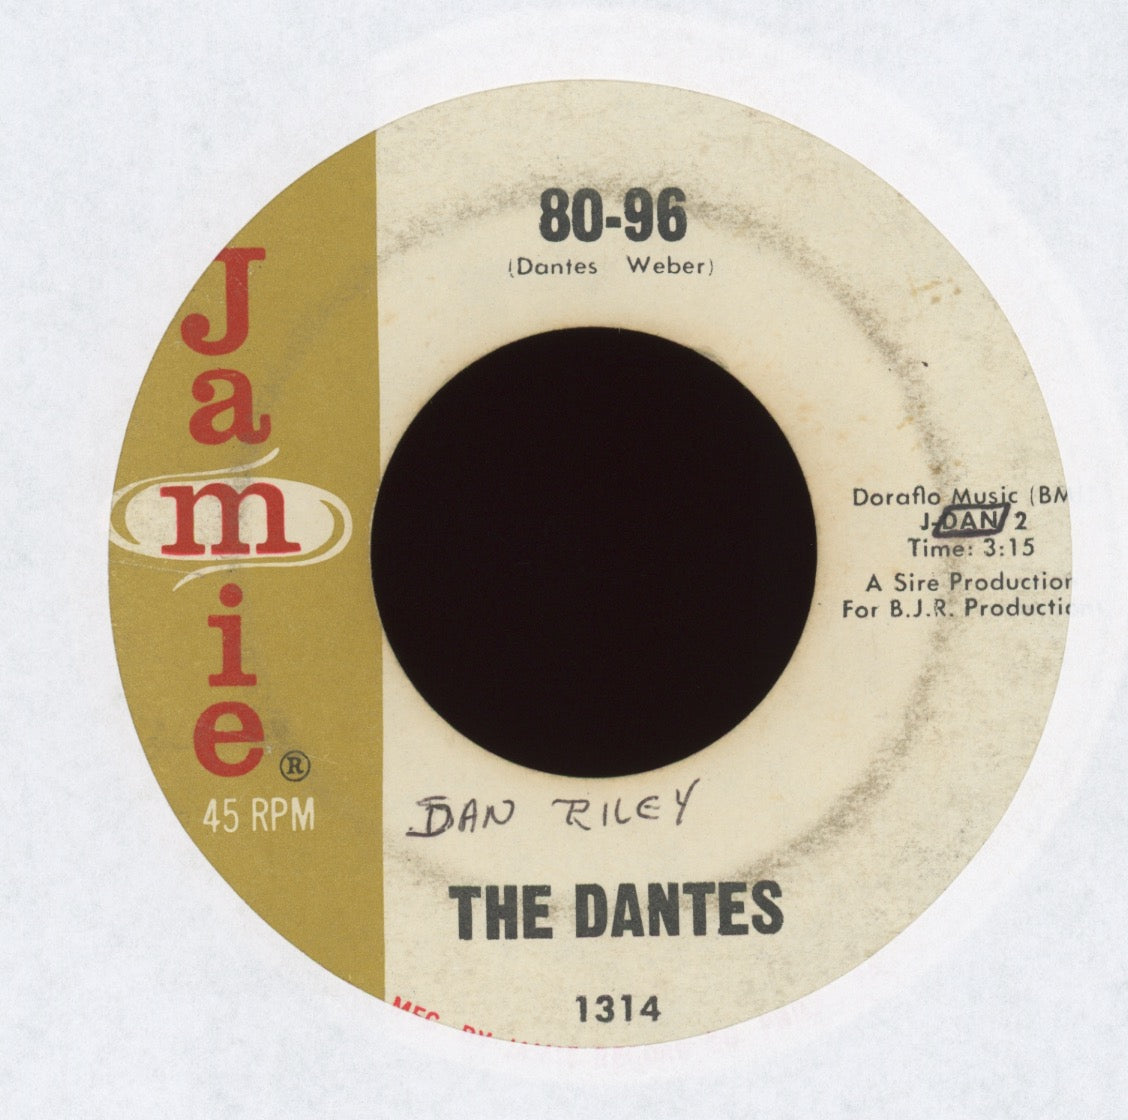 The Dantes - Can't Get Enough Of Your Love on Jamie